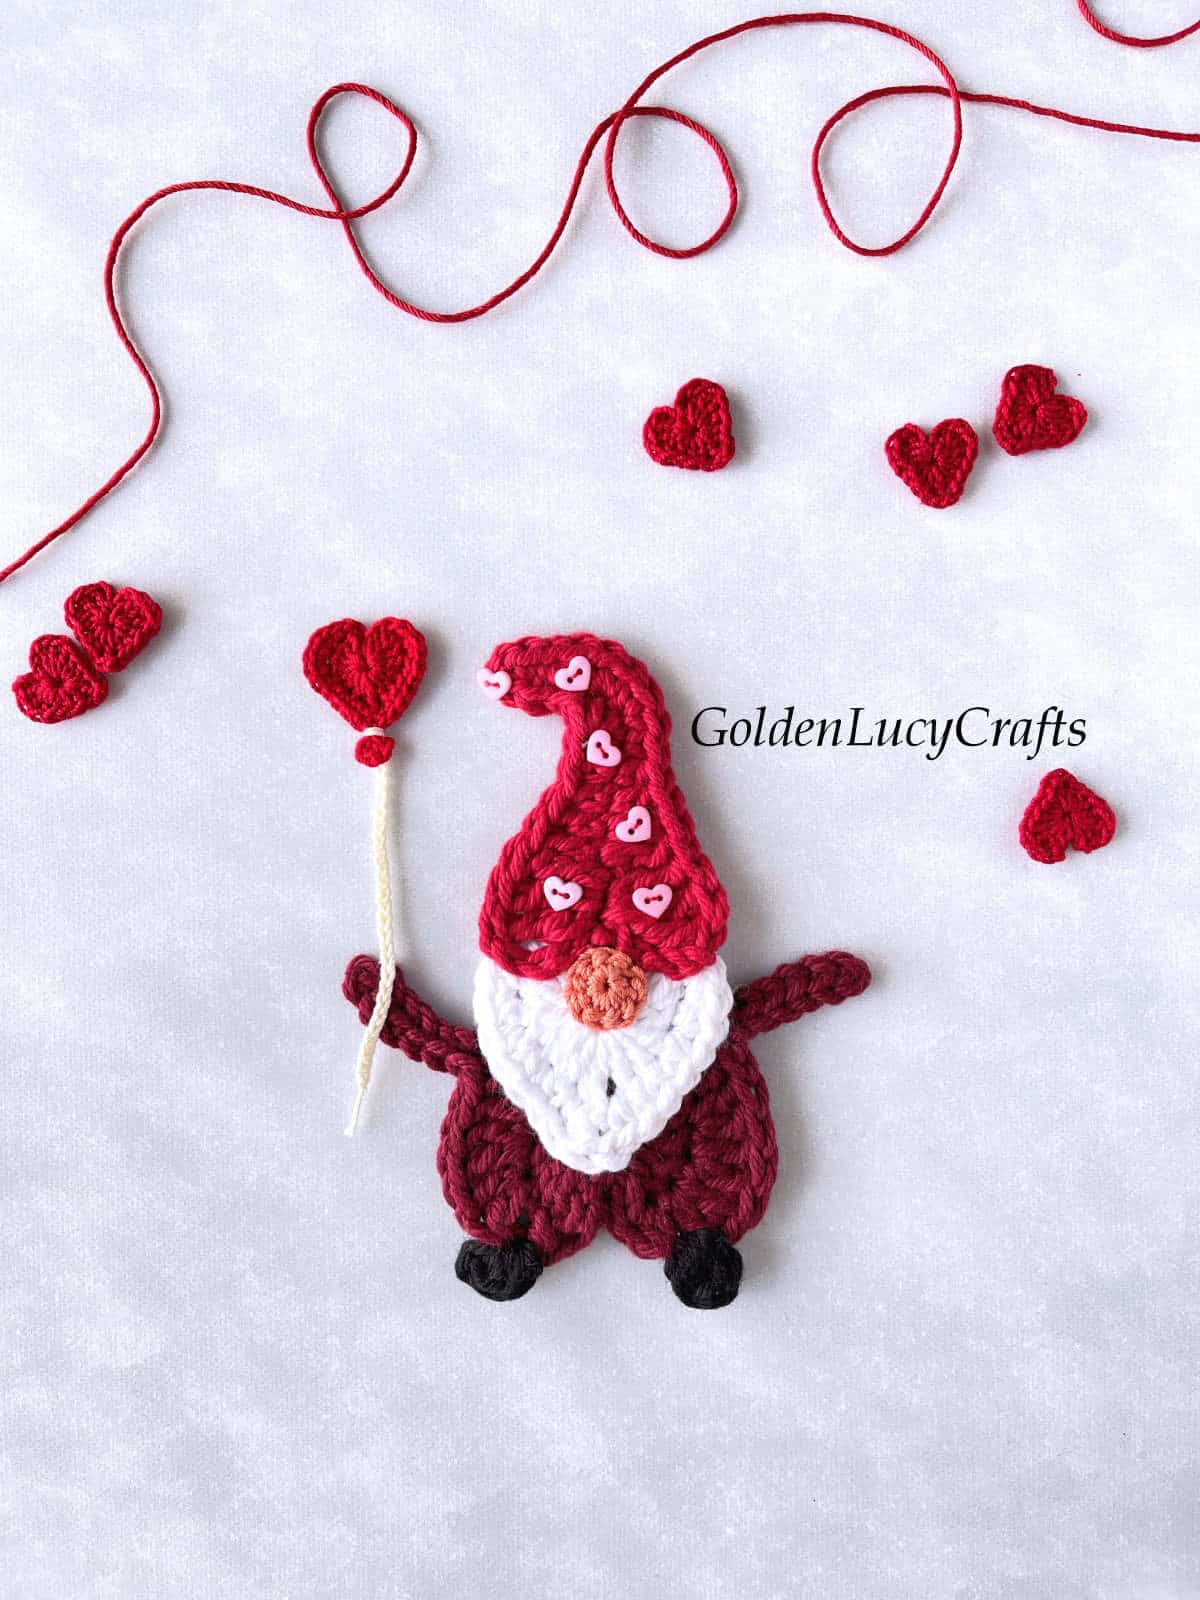 Crochet Valentine's Day gnome with heart balloon in his hand.